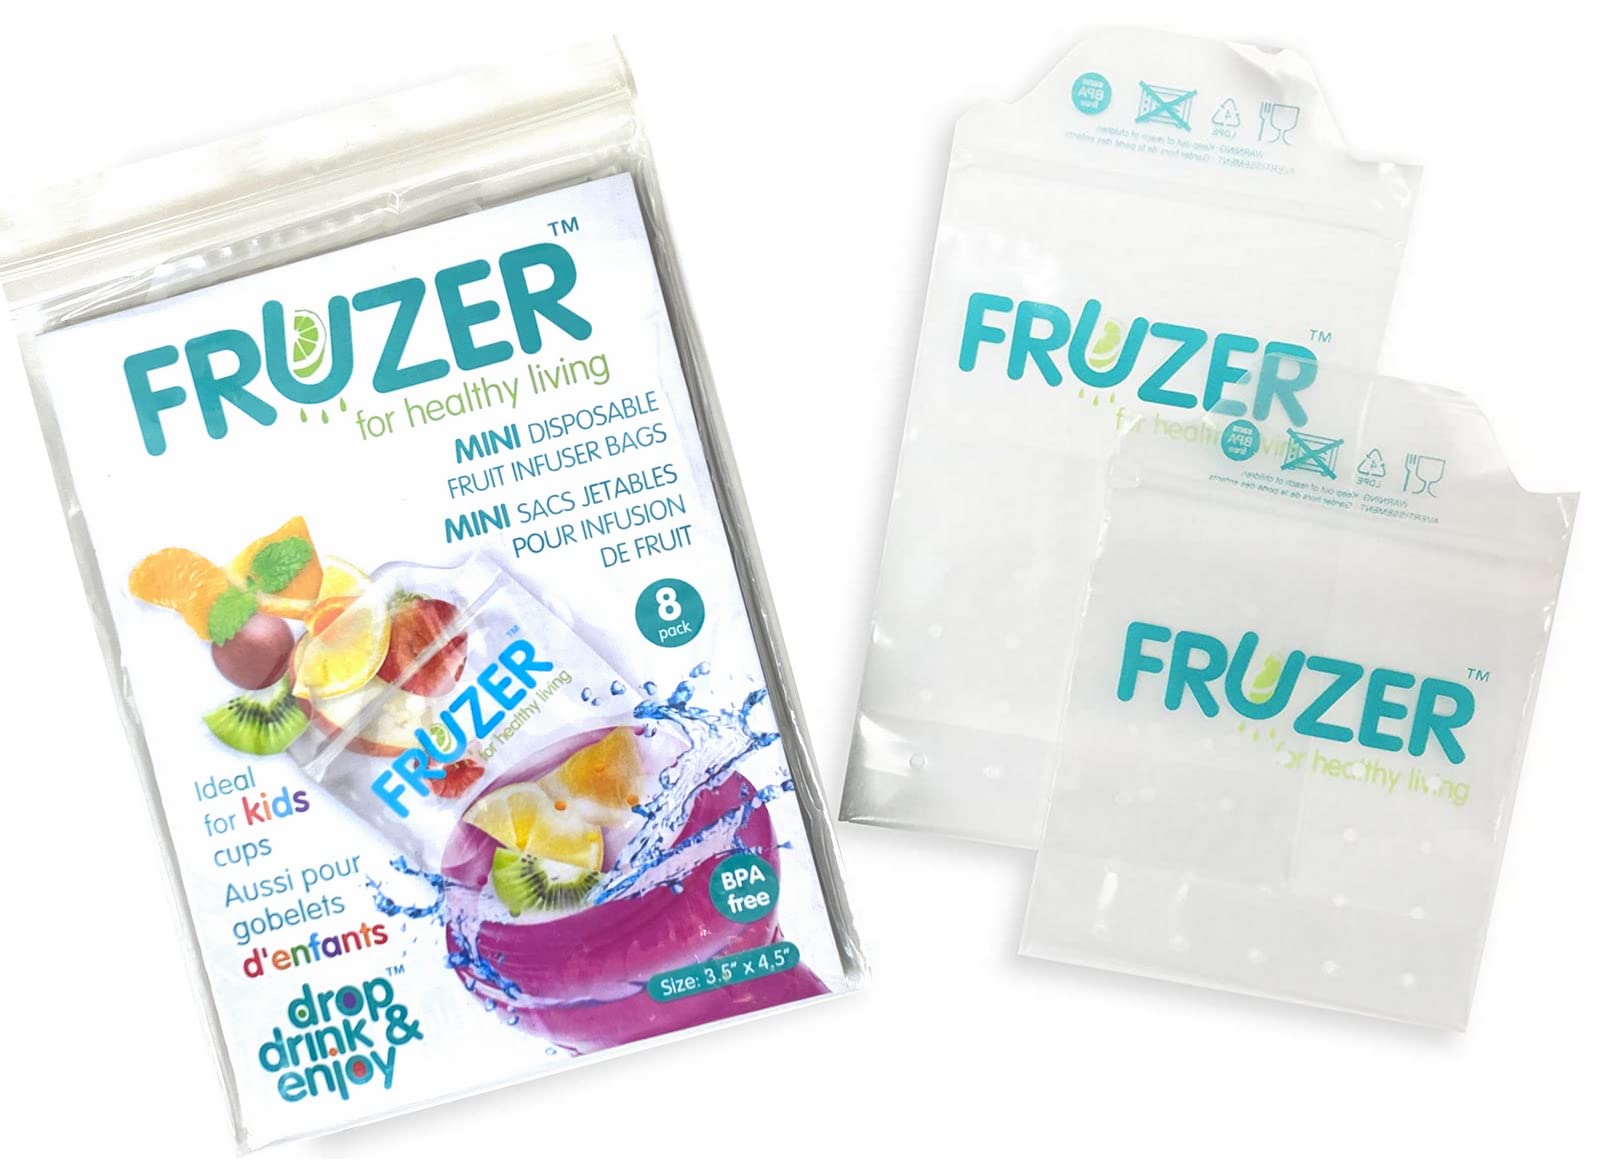 FRUZER Mini Disposable Fruit Infuser Bags (5 PK, each 8 Bags) Total 40 Bags - Refreshing & Beneficial - CLEAR & BPA-FREE